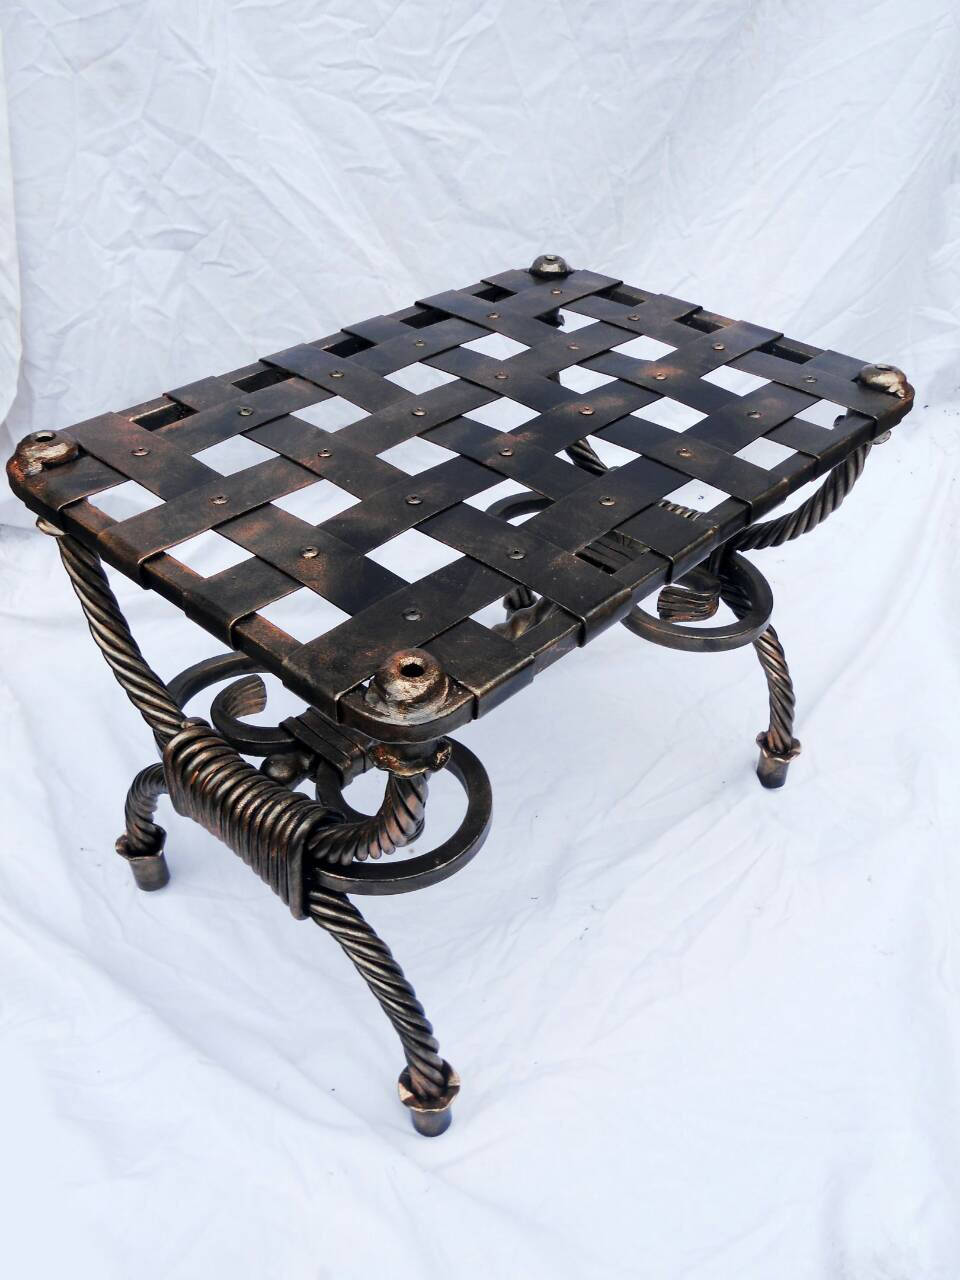 Hand forged chair, wrought iron chair, iron stool, garden chair, steel chair, lounge chair, unique chair, patio furniture, outdoor furniture